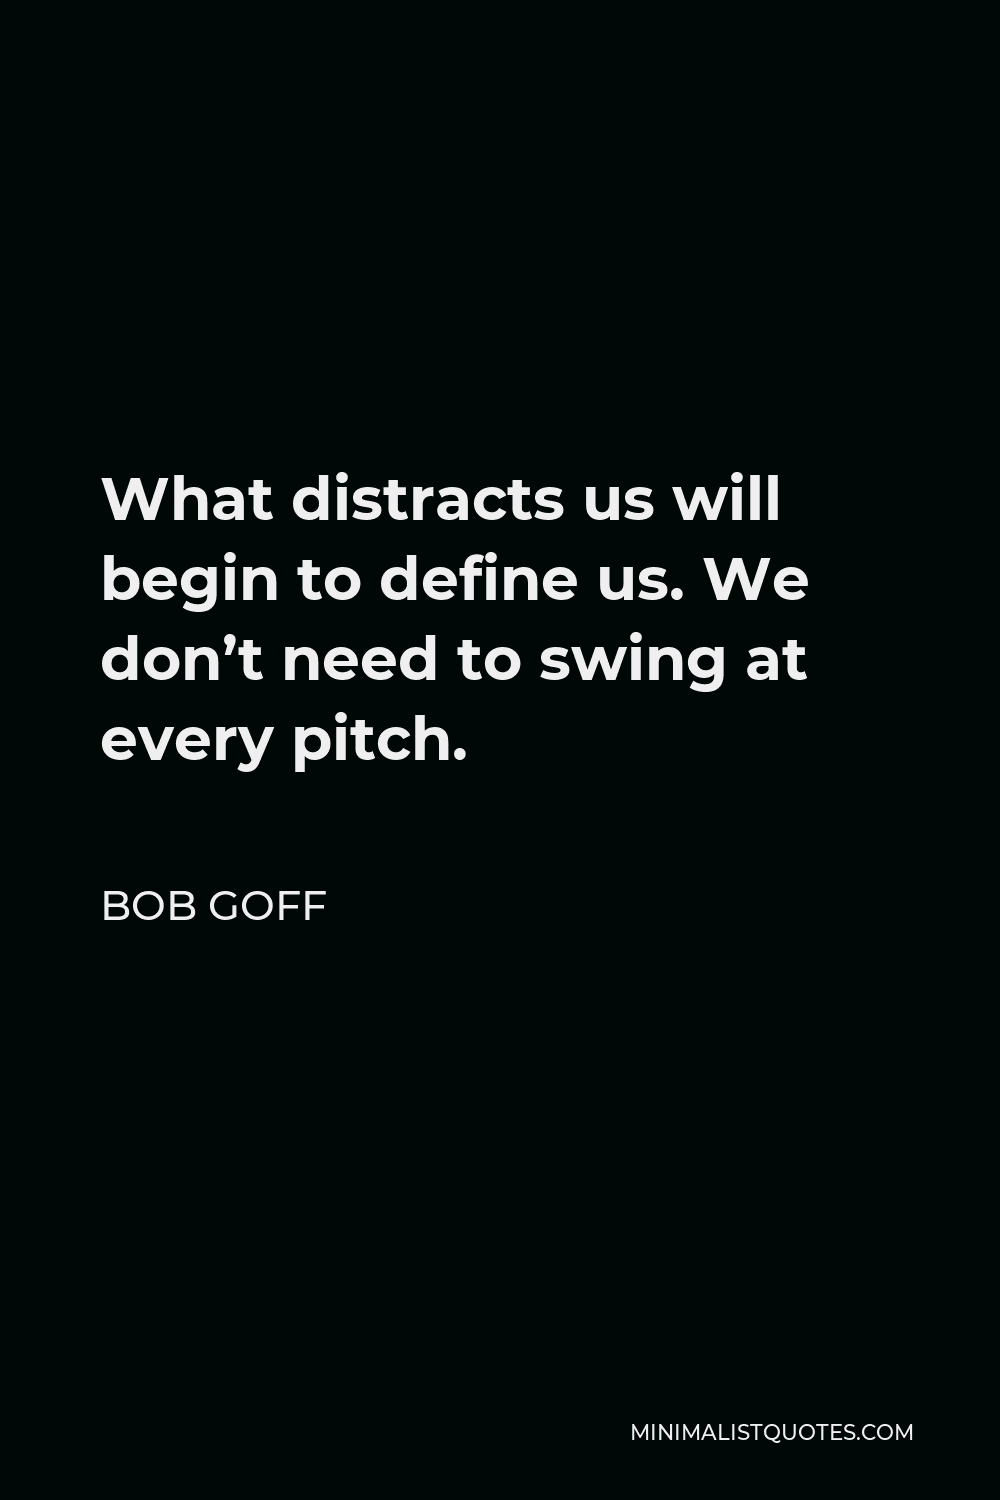 Bob Goff Quote - What distracts us will begin to define us. We don’t need to swing at every pitch.